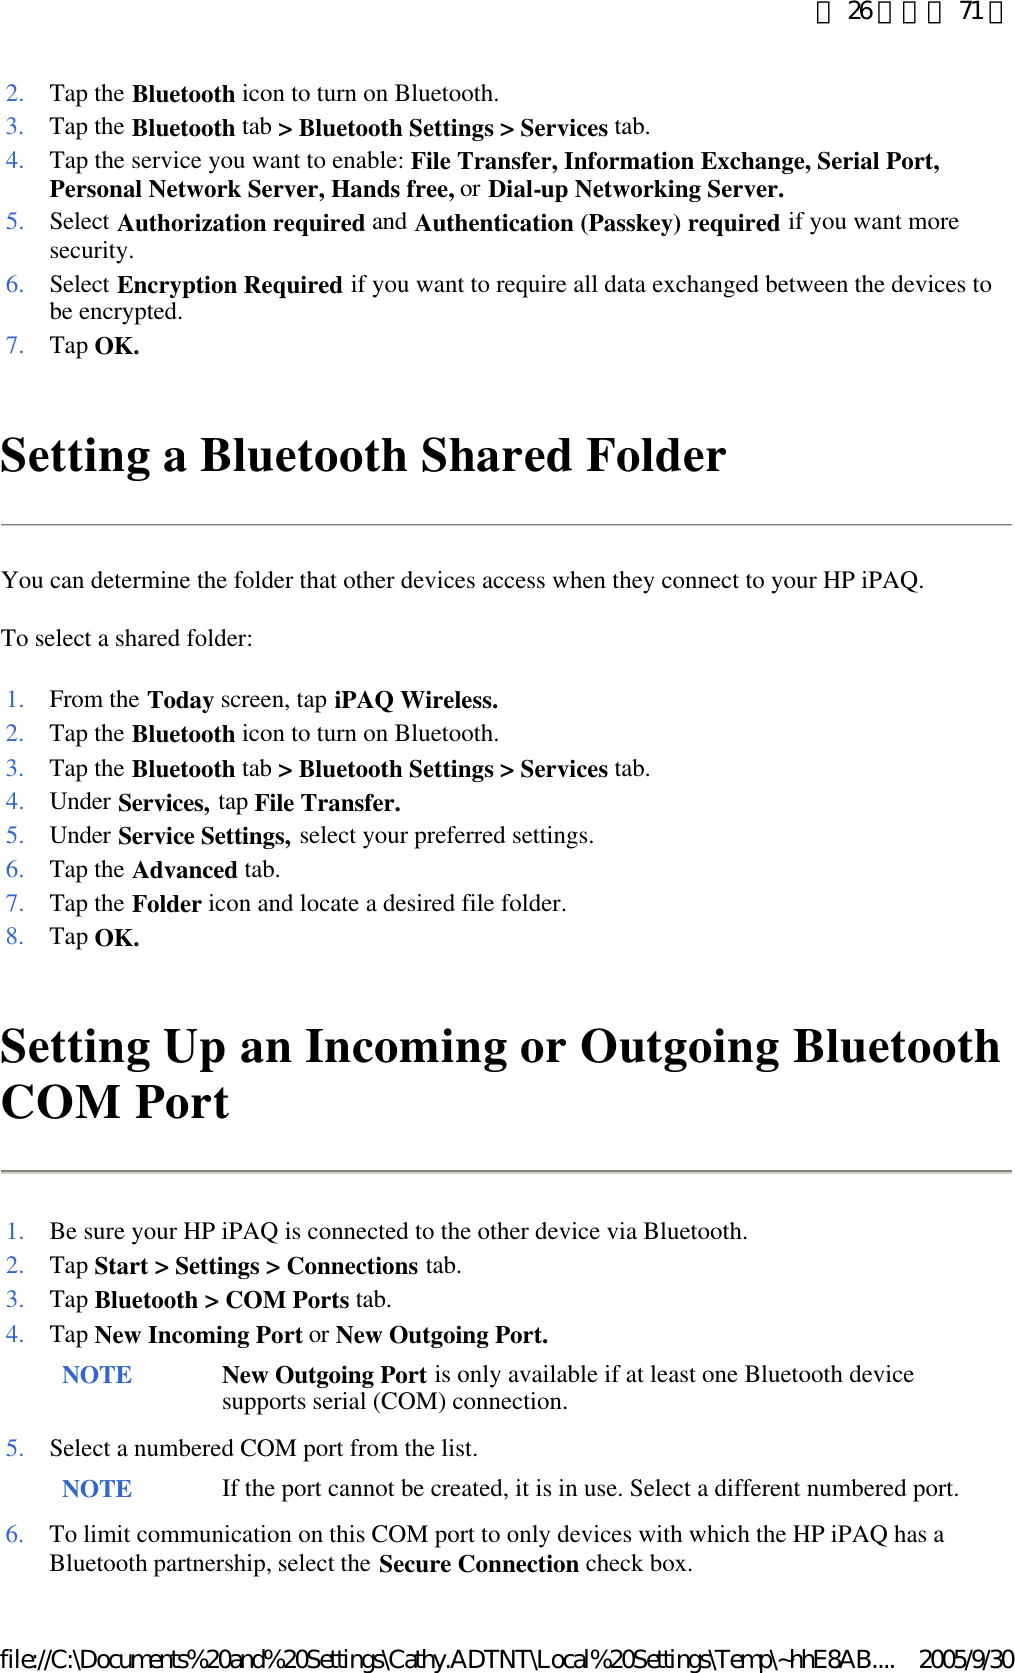 Setting a Bluetooth Shared Folder You can determine the folder that other devices access when they connect to your HP iPAQ. To select a shared folder: Setting Up an Incoming or Outgoing Bluetooth COM Port  2. Tap the Bluetooth icon to turn on Bluetooth. 3. Tap the Bluetooth tab &gt; Bluetooth Settings &gt; Services tab. 4. Tap the service you want to enable: File Transfer, Information Exchange, Serial Port, Personal Network Server, Hands free, or Dial-up Networking Server.5. Select Authorization required and Authentication (Passkey) required if you want more security. 6. Select Encryption Required if you want to require all data exchanged between the devices to be encrypted. 7. Tap OK.1. From the Today screen, tap iPAQ Wireless.2. Tap the Bluetooth icon to turn on Bluetooth. 3. Tap the Bluetooth tab &gt; Bluetooth Settings &gt; Services tab. 4. Under Services, tap File Transfer.5. Under Service Settings, select your preferred settings. 6. Tap the Advanced tab. 7. Tap the Folder icon and locate a desired file folder. 8. Tap OK.1. Be sure your HP iPAQ is connected to the other device via Bluetooth. 2. Tap Start &gt; Settings &gt; Connections tab. 3. Tap Bluetooth &gt; COM Ports tab. 4. Tap New Incoming Port or New Outgoing Port. NOTE New Outgoing Port is only available if at least one Bluetooth device supports serial (COM) connection.  5. Select a numbered COM port from the list. NOTE If the port cannot be created, it is in use. Select a different numbered port. 6. To limit communication on this COM port to only devices with which the HP iPAQ has a Bluetooth partnership, select the Secure Connection check box. 第 26 頁，共 71 頁2005/9/30file://C:\Documents%20and%20Settings\Cathy.ADTNT\Local%20Settings\Temp\~hhE8AB....